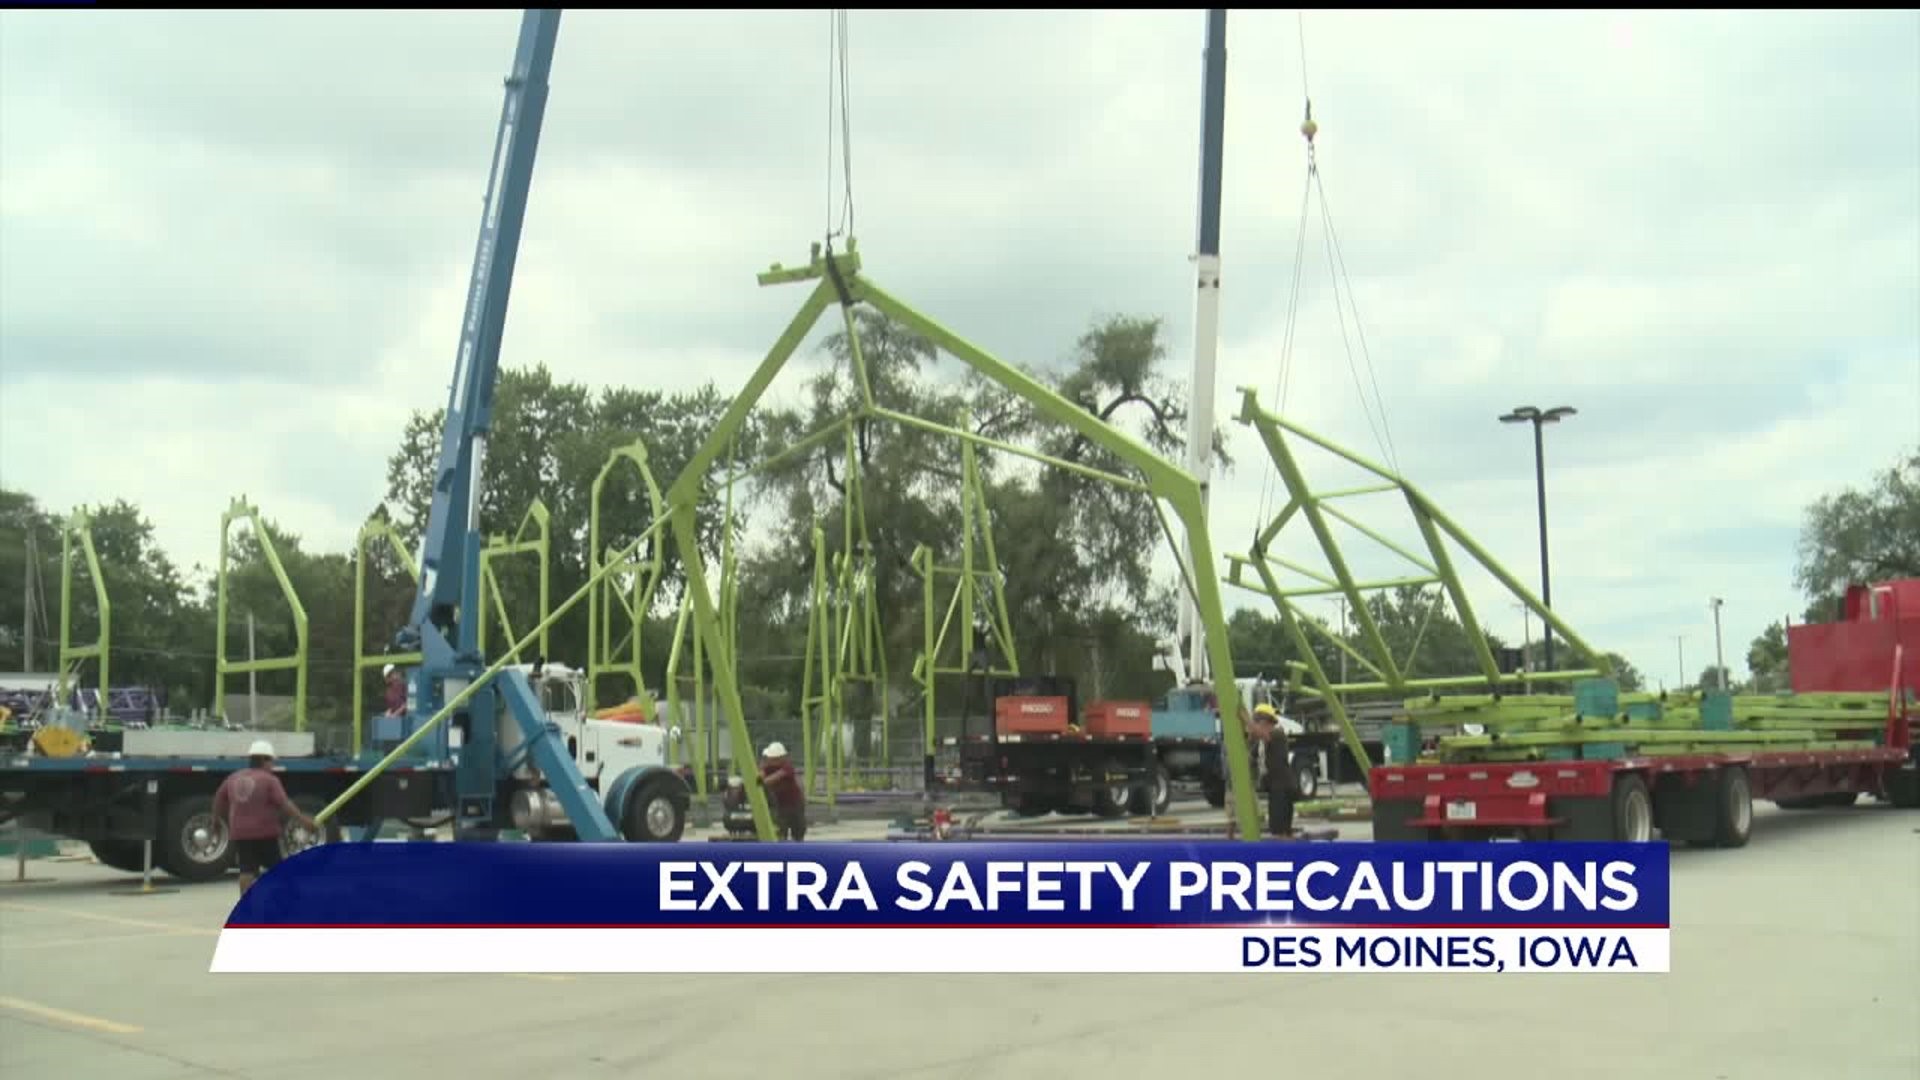 taking extra precautions at the Iowa State Fair